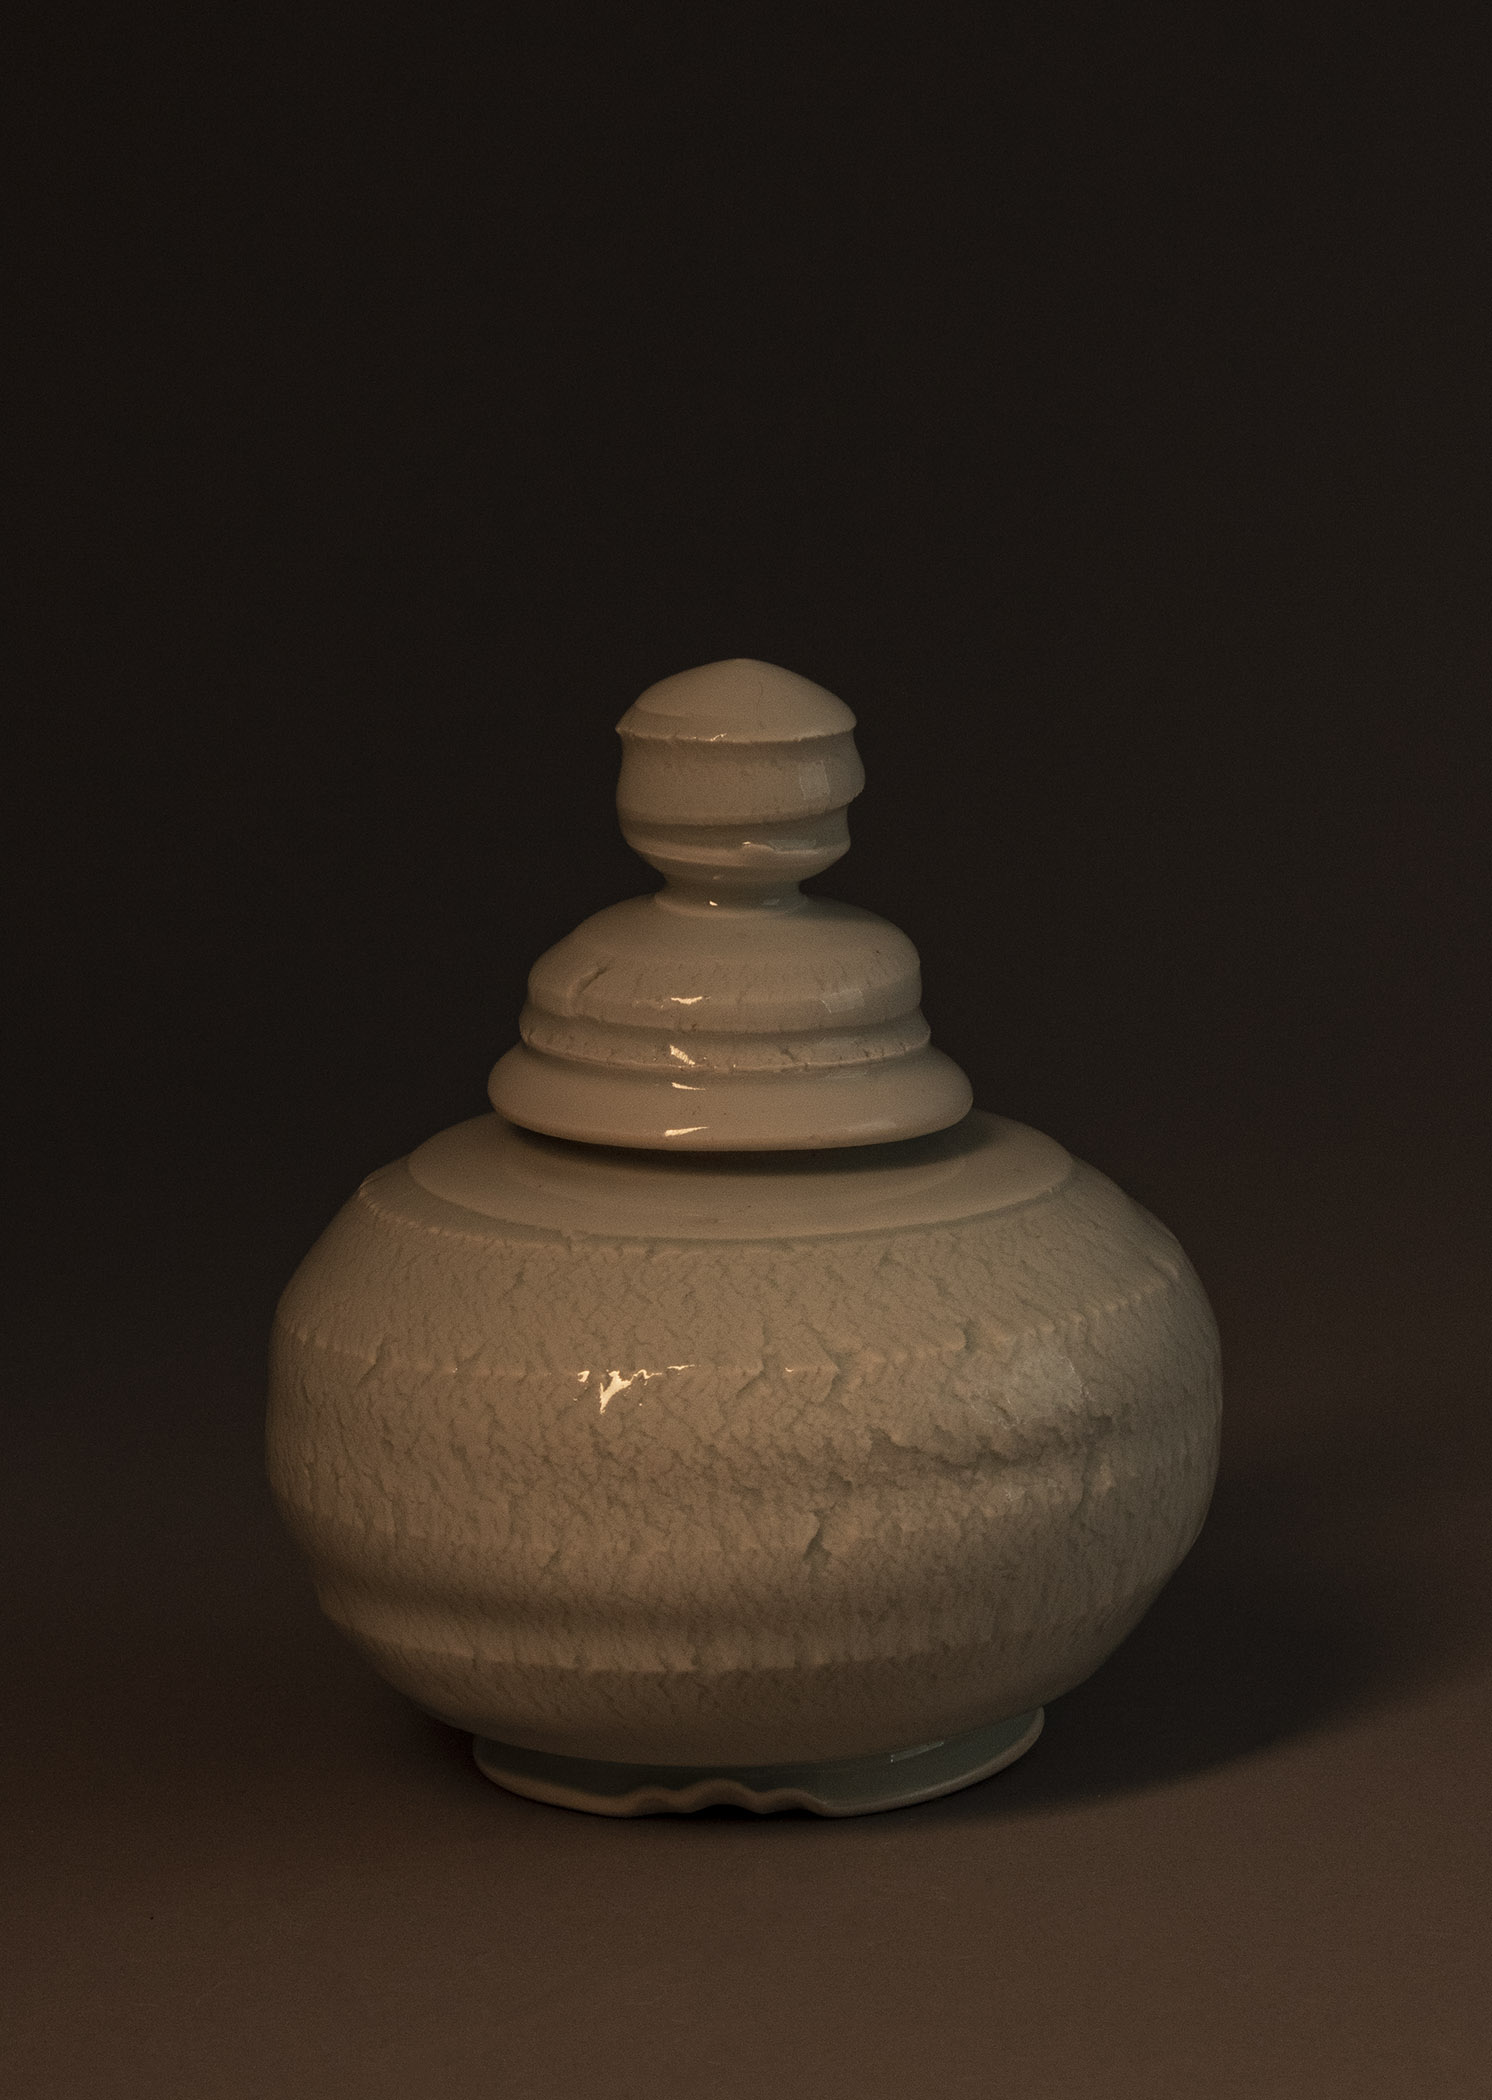 A lidded jar with a somewhat irregular orb-shaped body, a shallow ring-shaped foot that flares out at it’s base, and an irregular dome-shaped lid topped with a sort of twisting textured finial. The jar itself has the open texture of stretched clay. The lid and finial have ridges that spiral around their forms and show some stretching/cracking at their edges. The glaze is glassy.